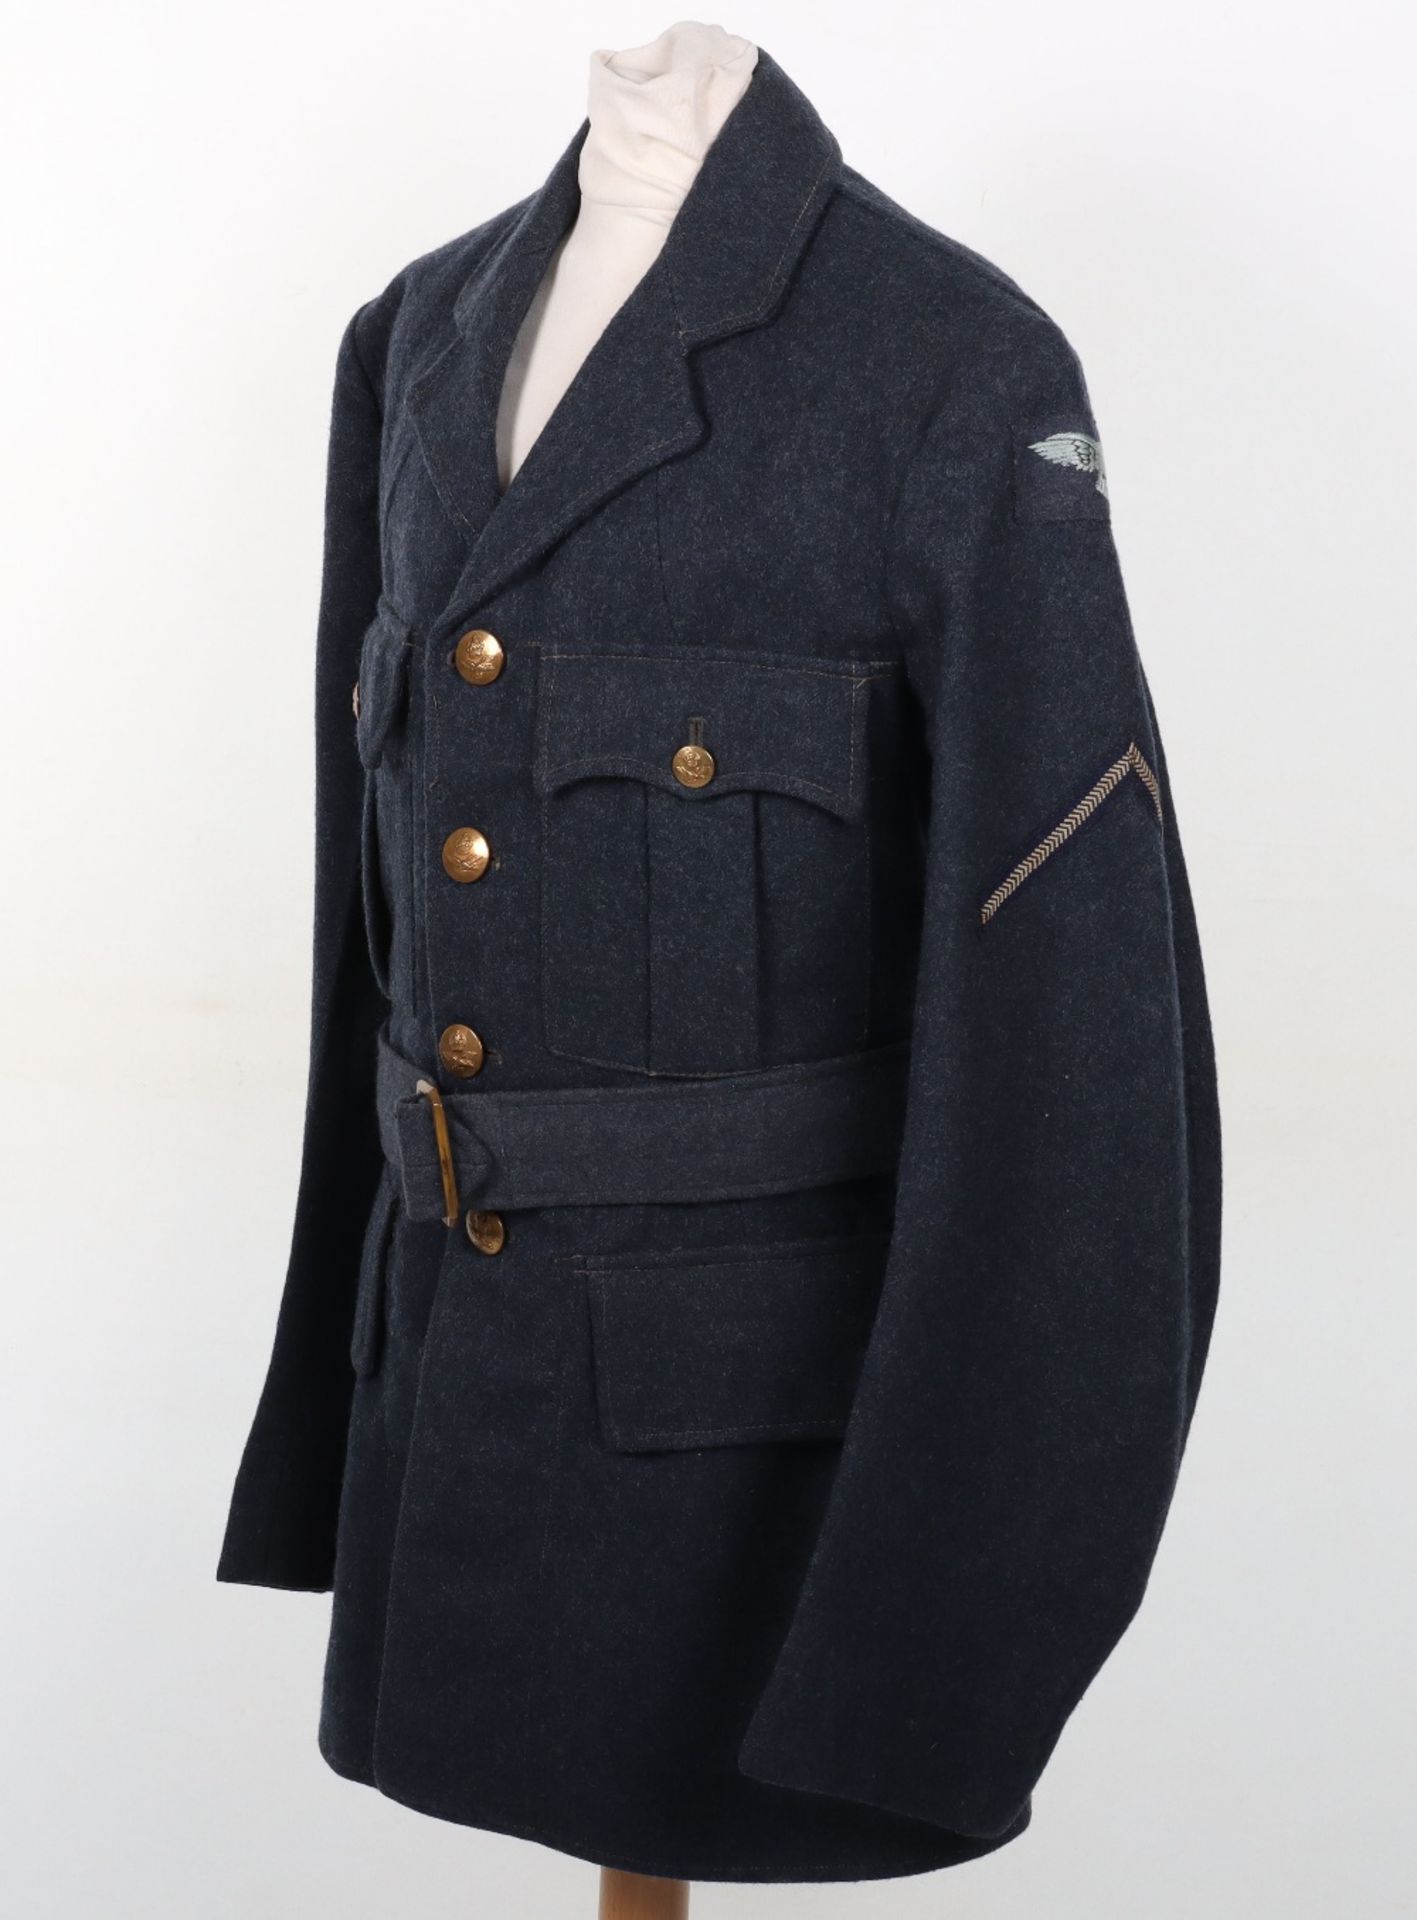 Royal Air Force Service Dress Tunic - Image 4 of 10